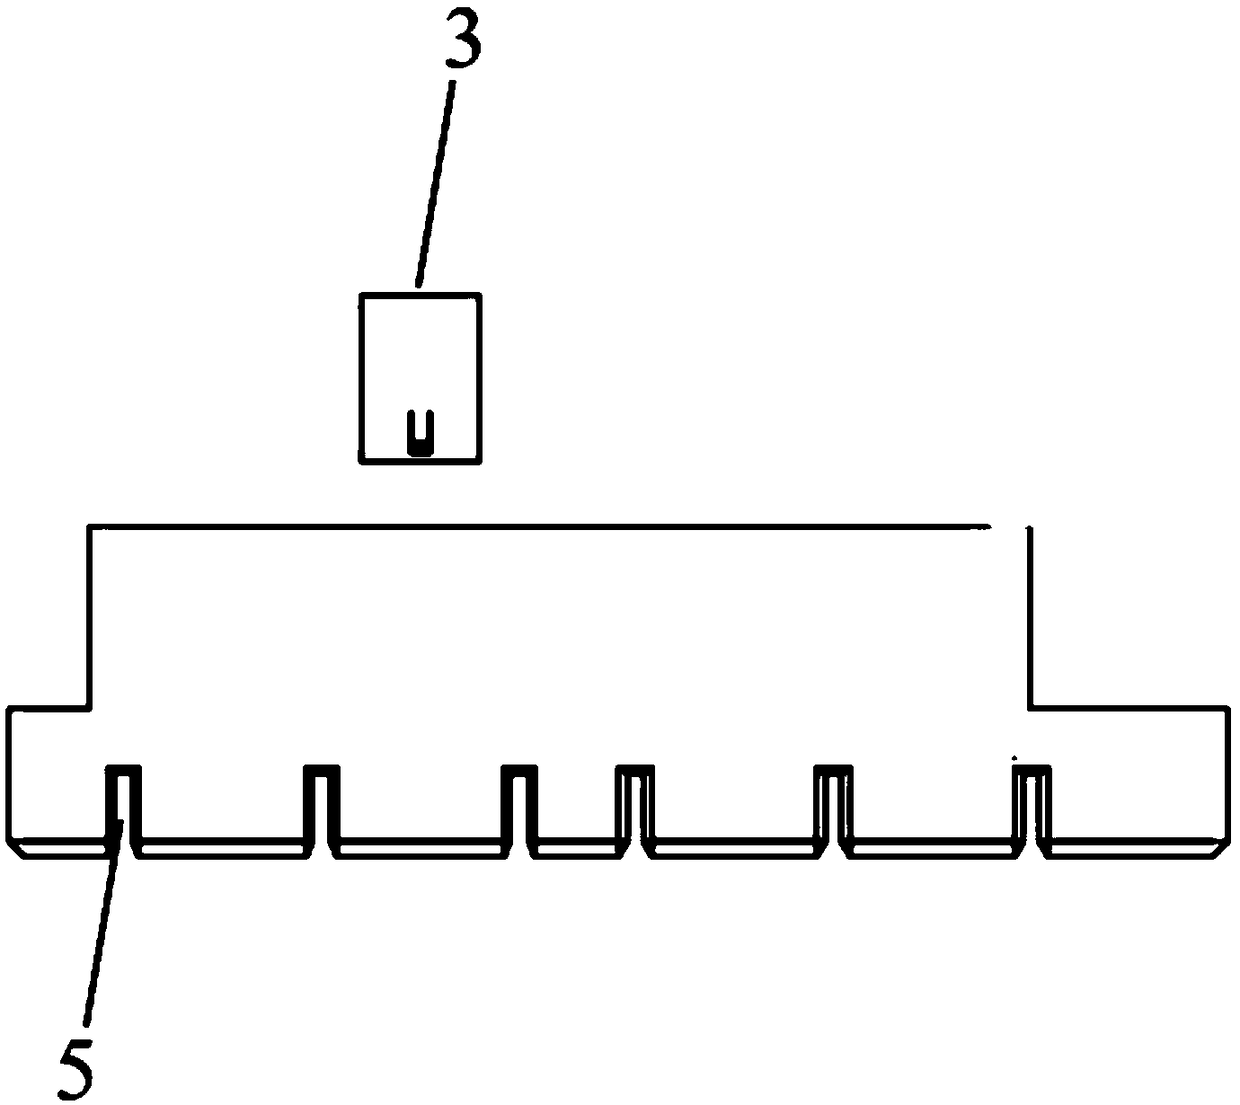 A[beta]1-42 detection reagent strip and application of same